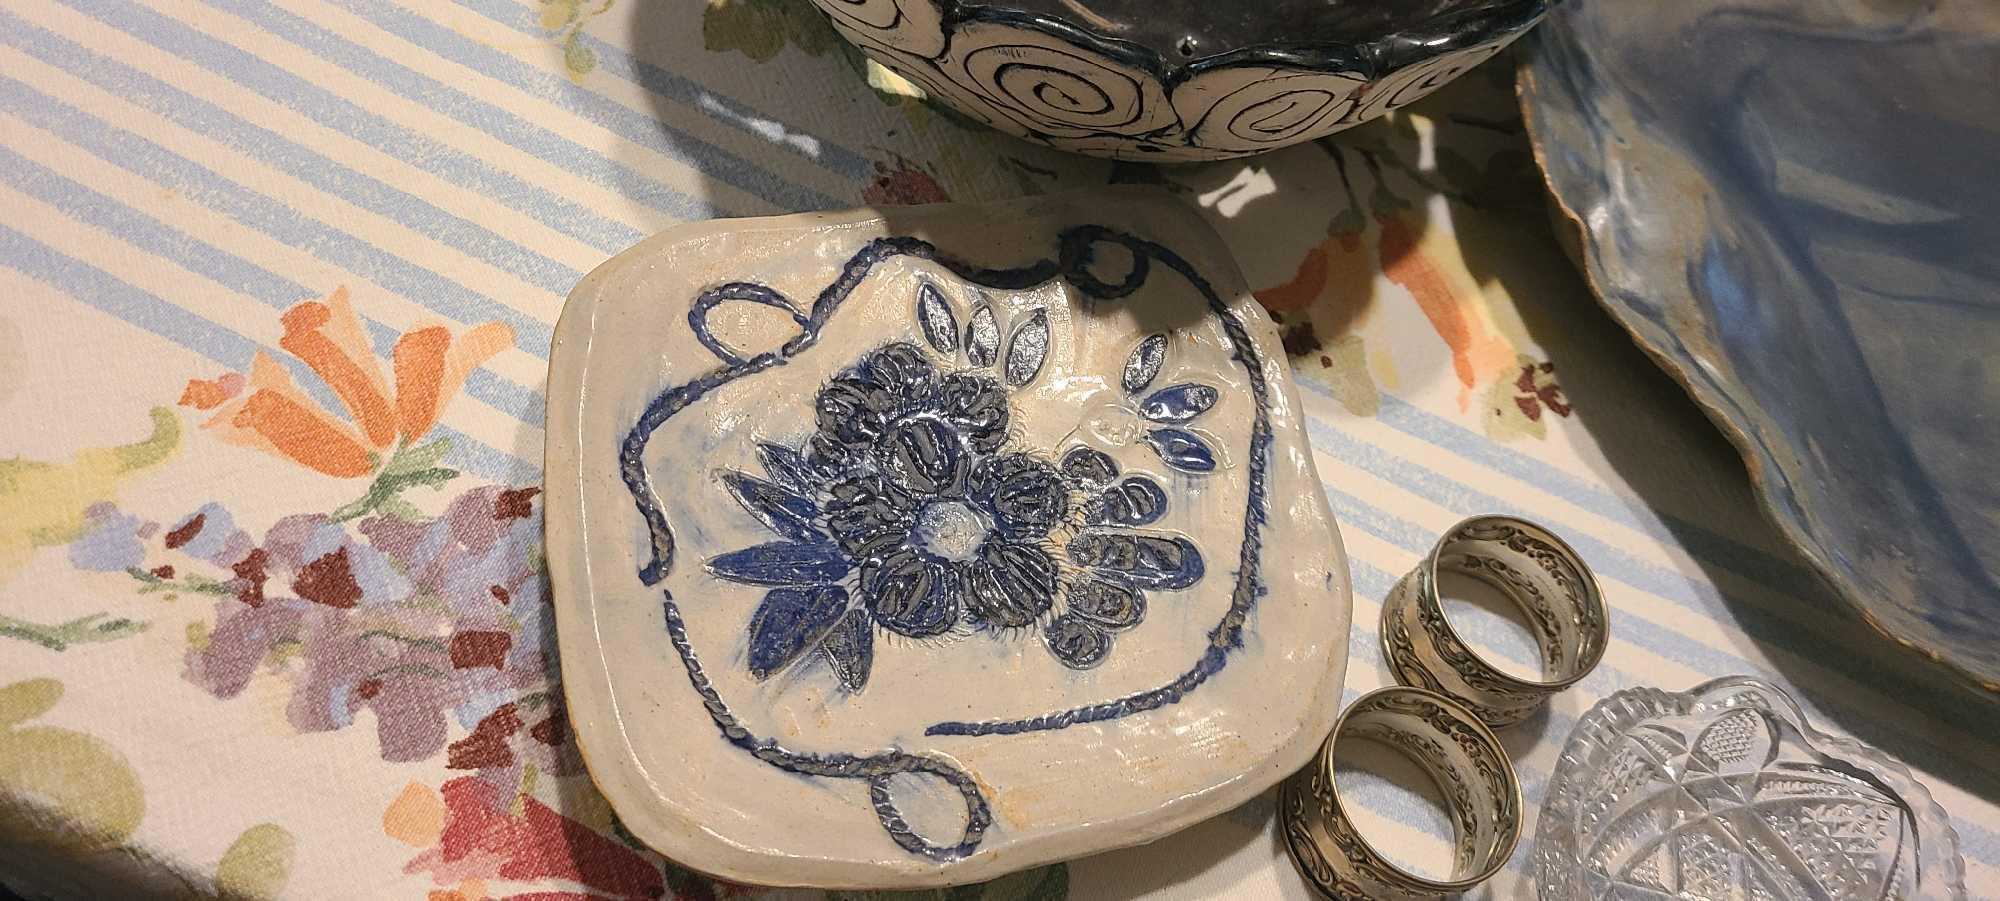 Pottery Dishes $3 STS